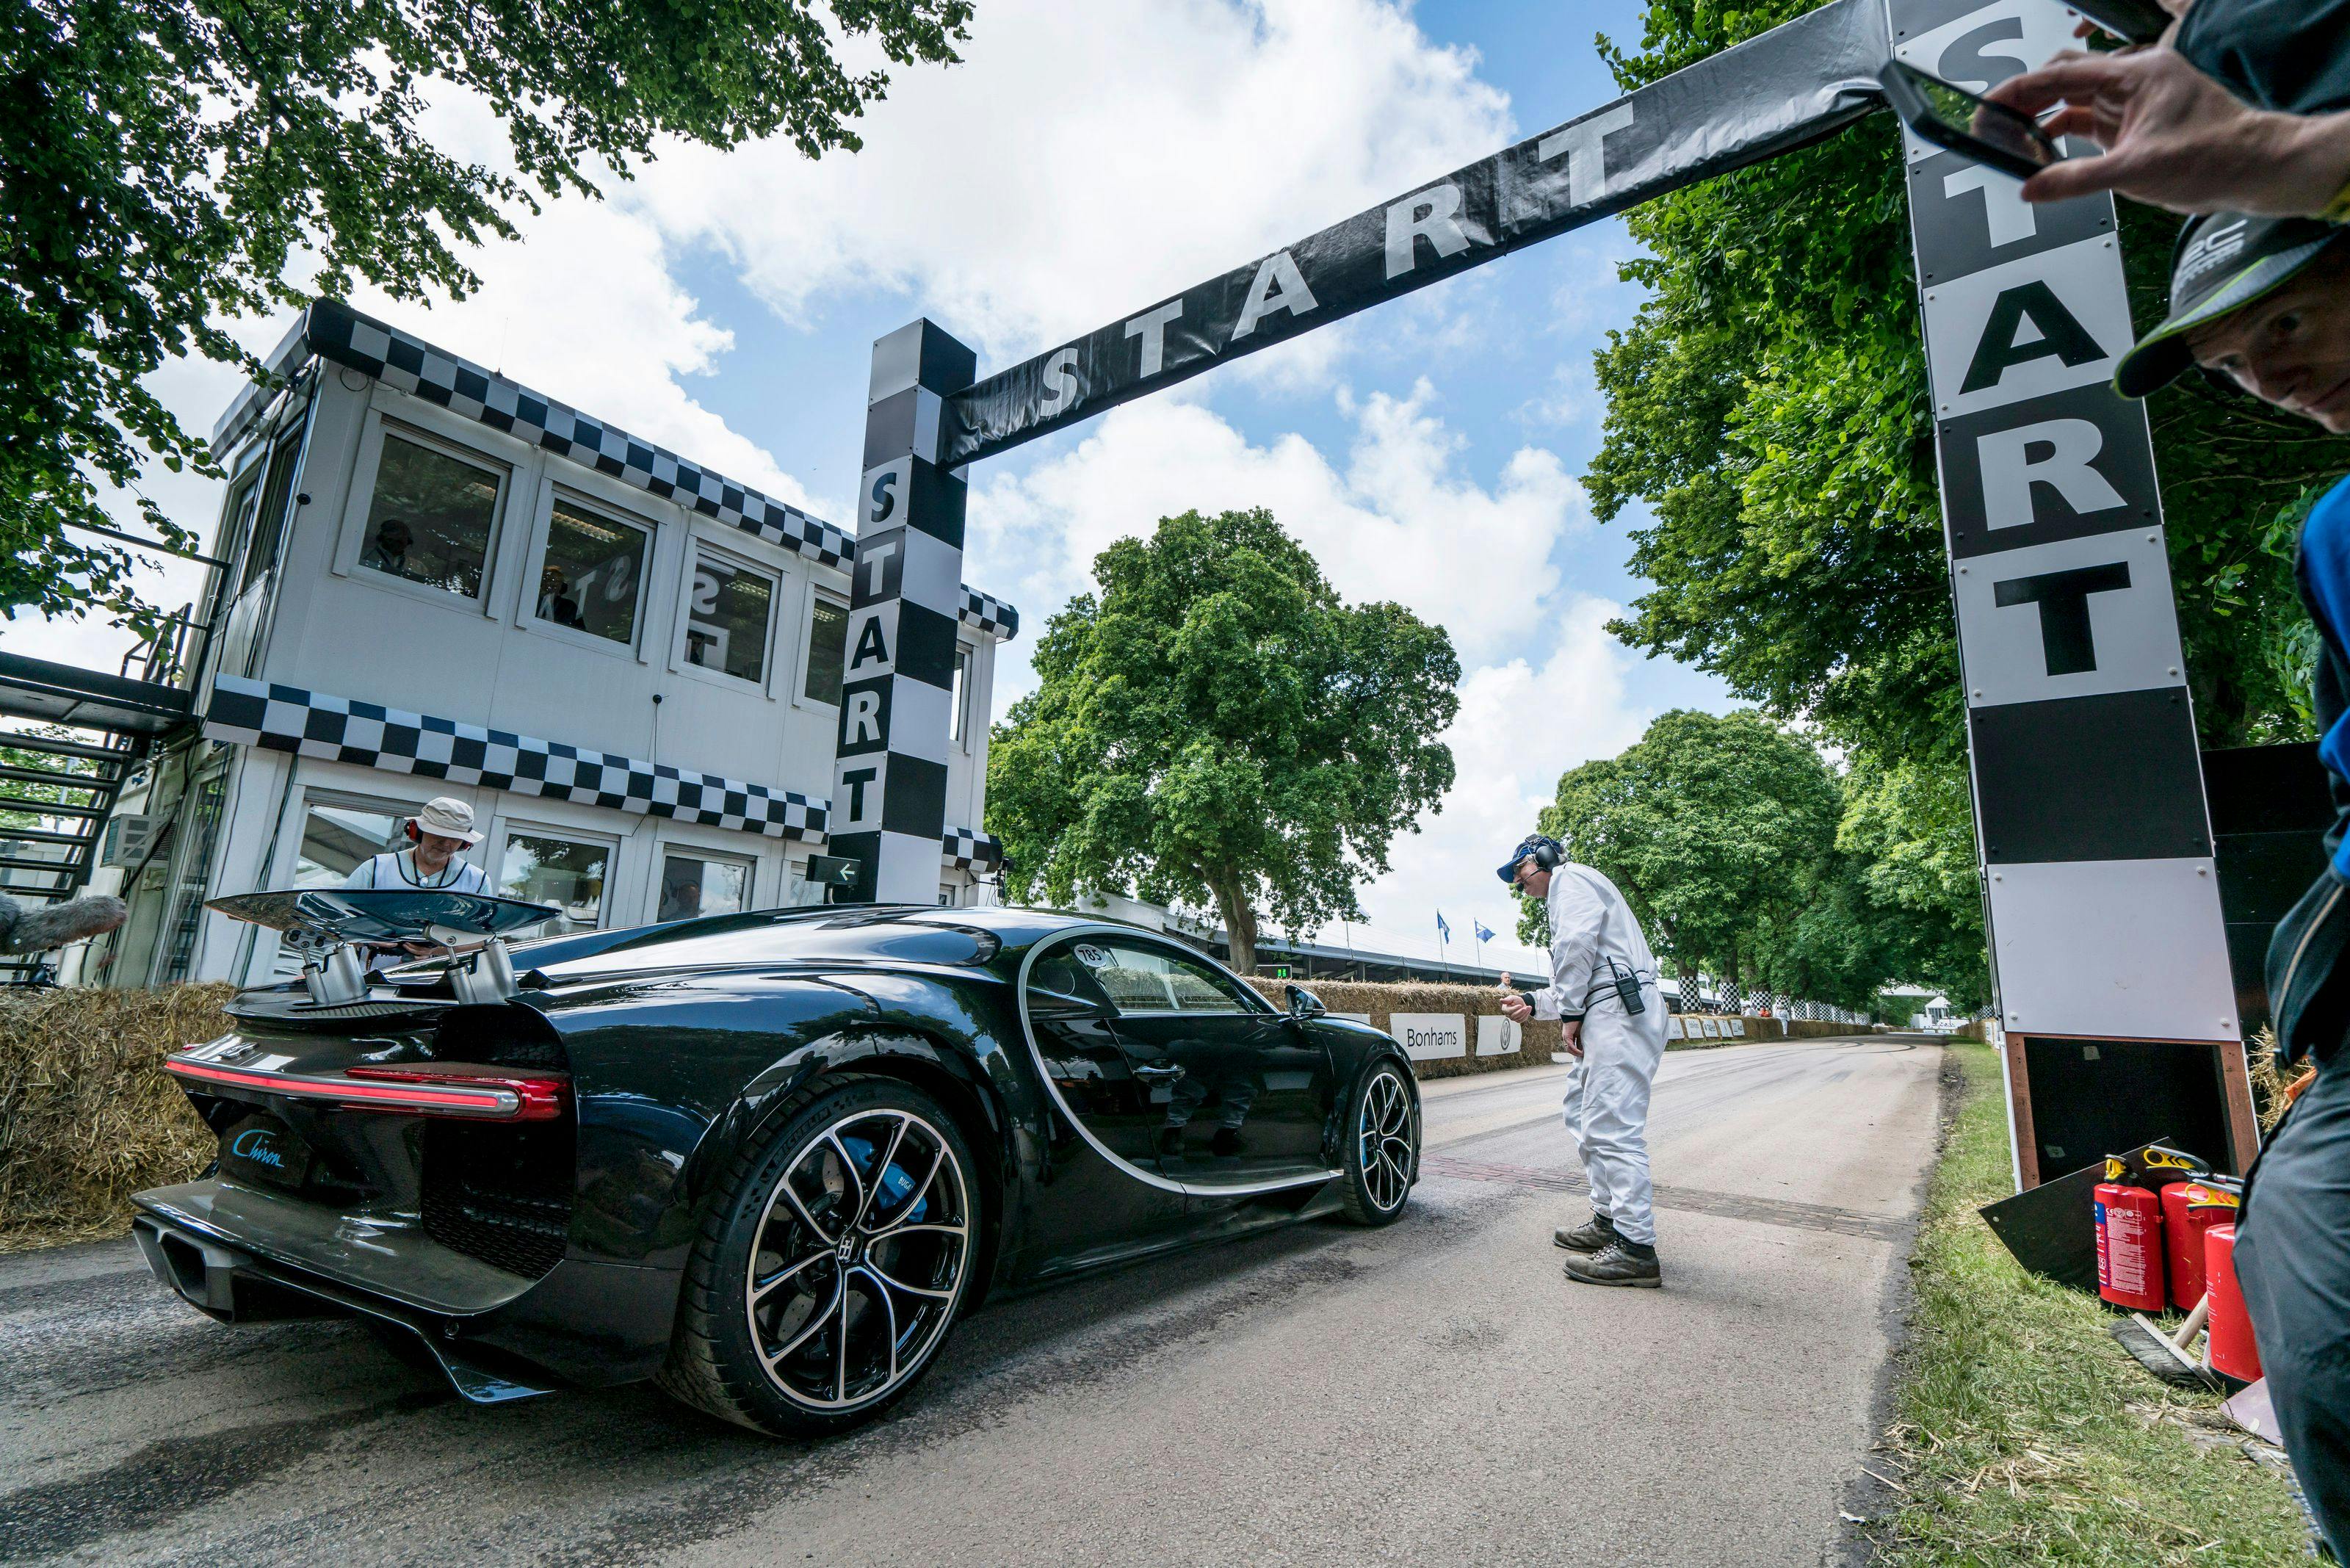 Goodwood Festival of Speed 2016: UK premiere of the Bugatti Chiron